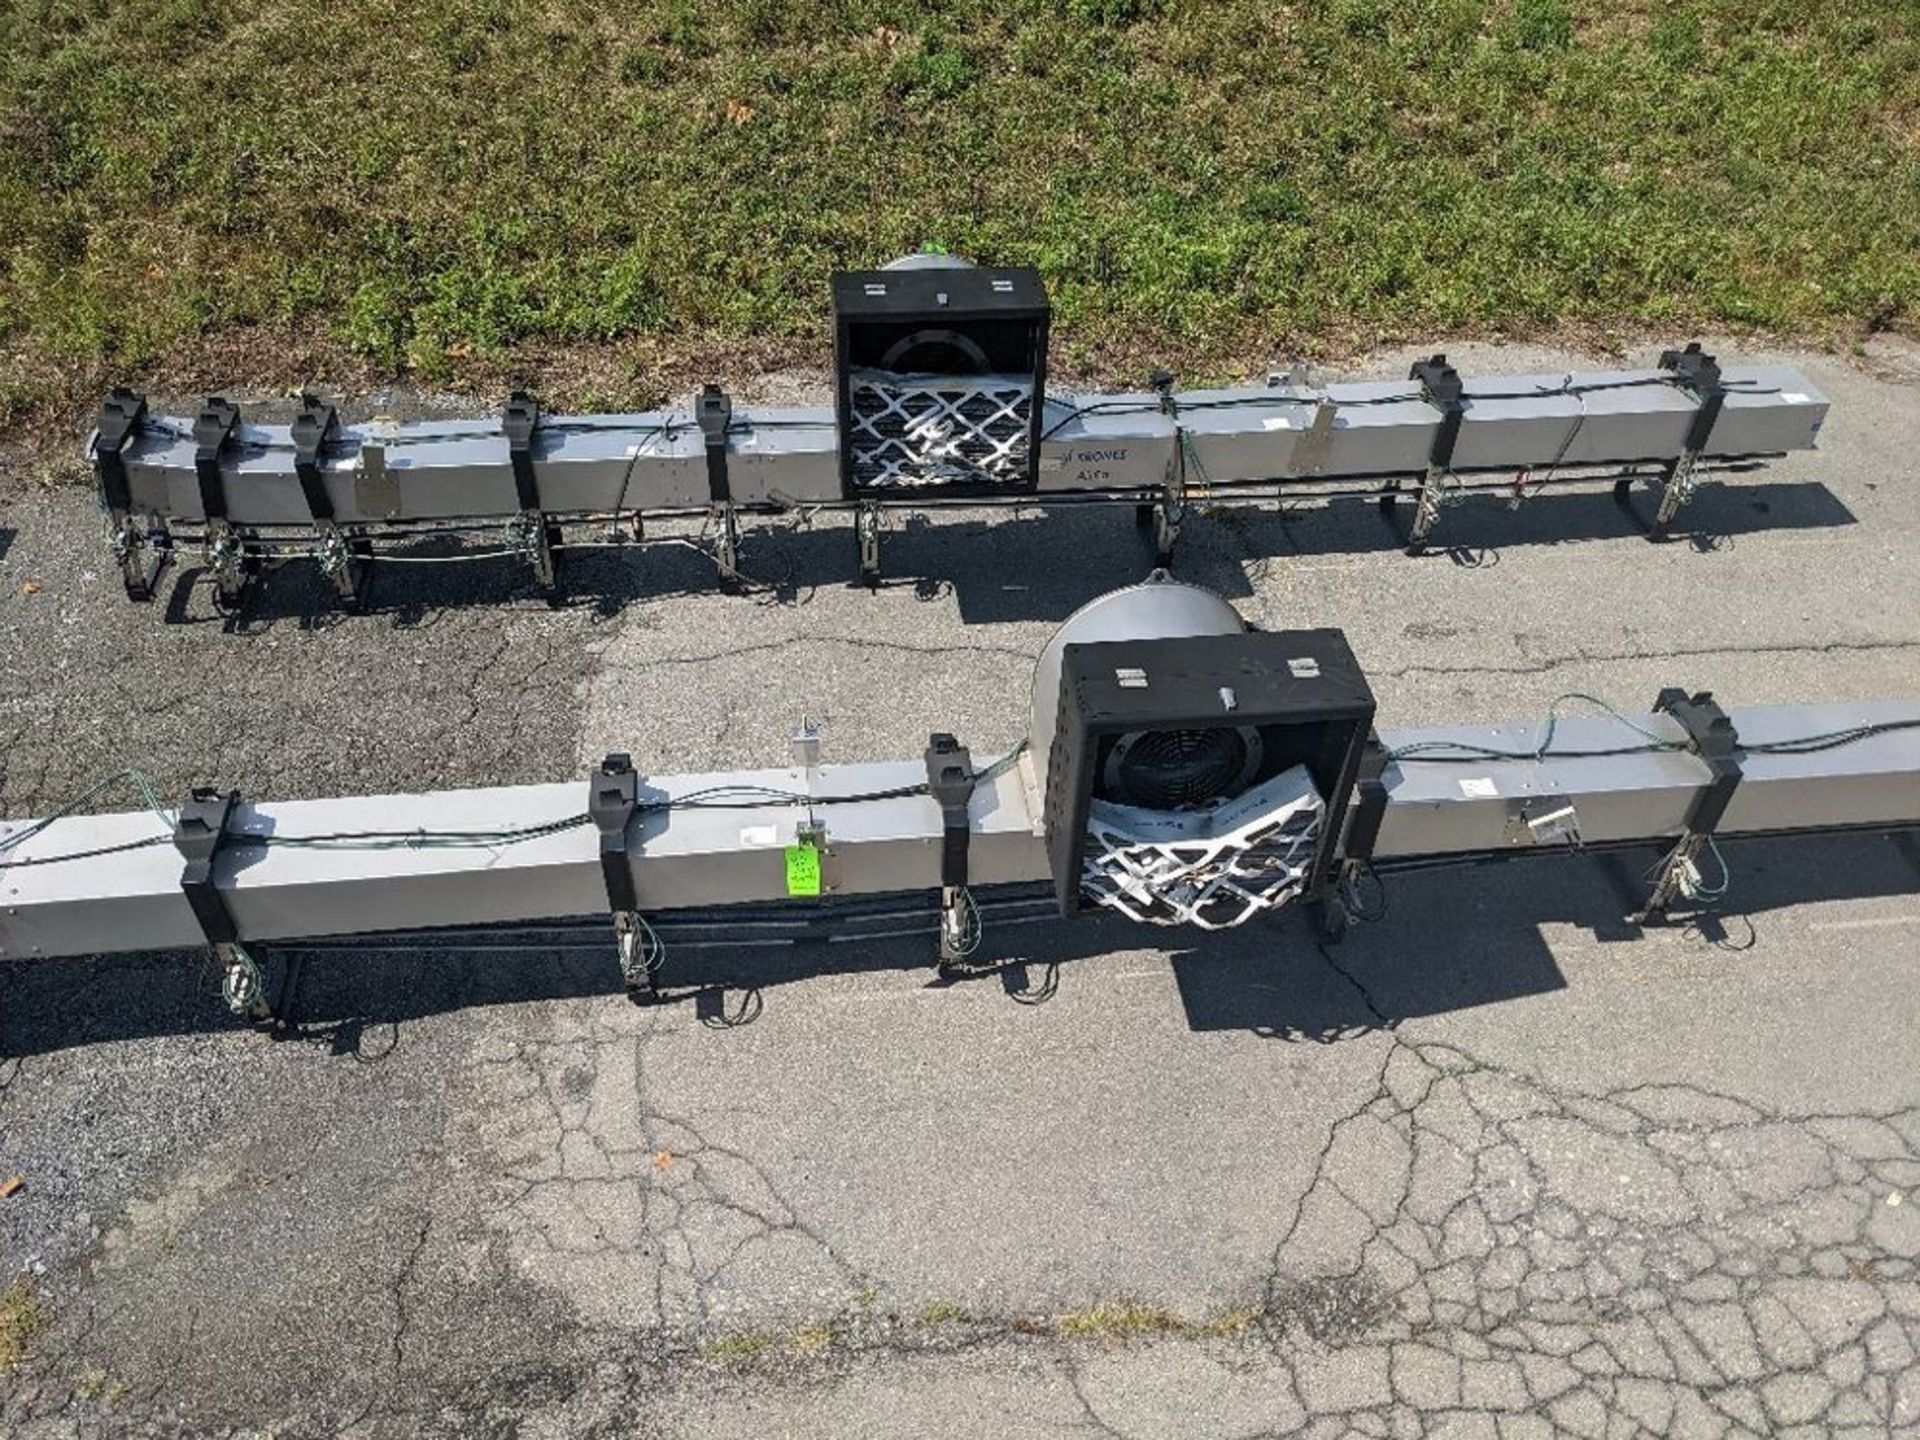 Krones Air Conveyor Sections Including (4) 20' Straight w/ Blowers (1) 36’ Straight w/ Blowers (1) - Image 2 of 9